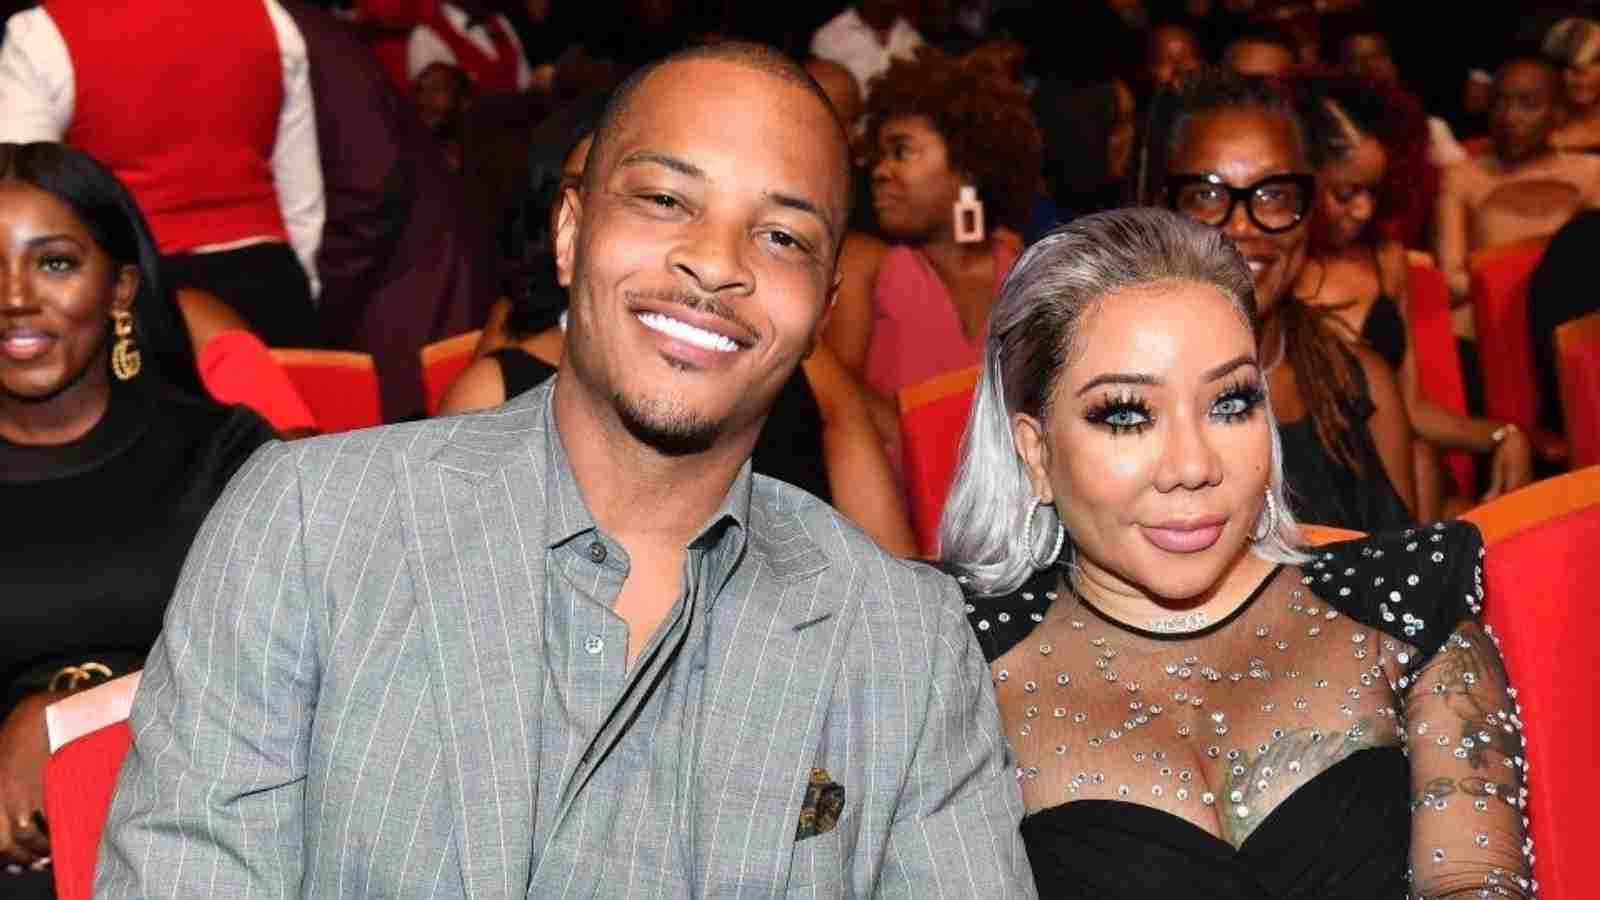 Rapper T.I. and wife Tiny accused of more sexual allegations